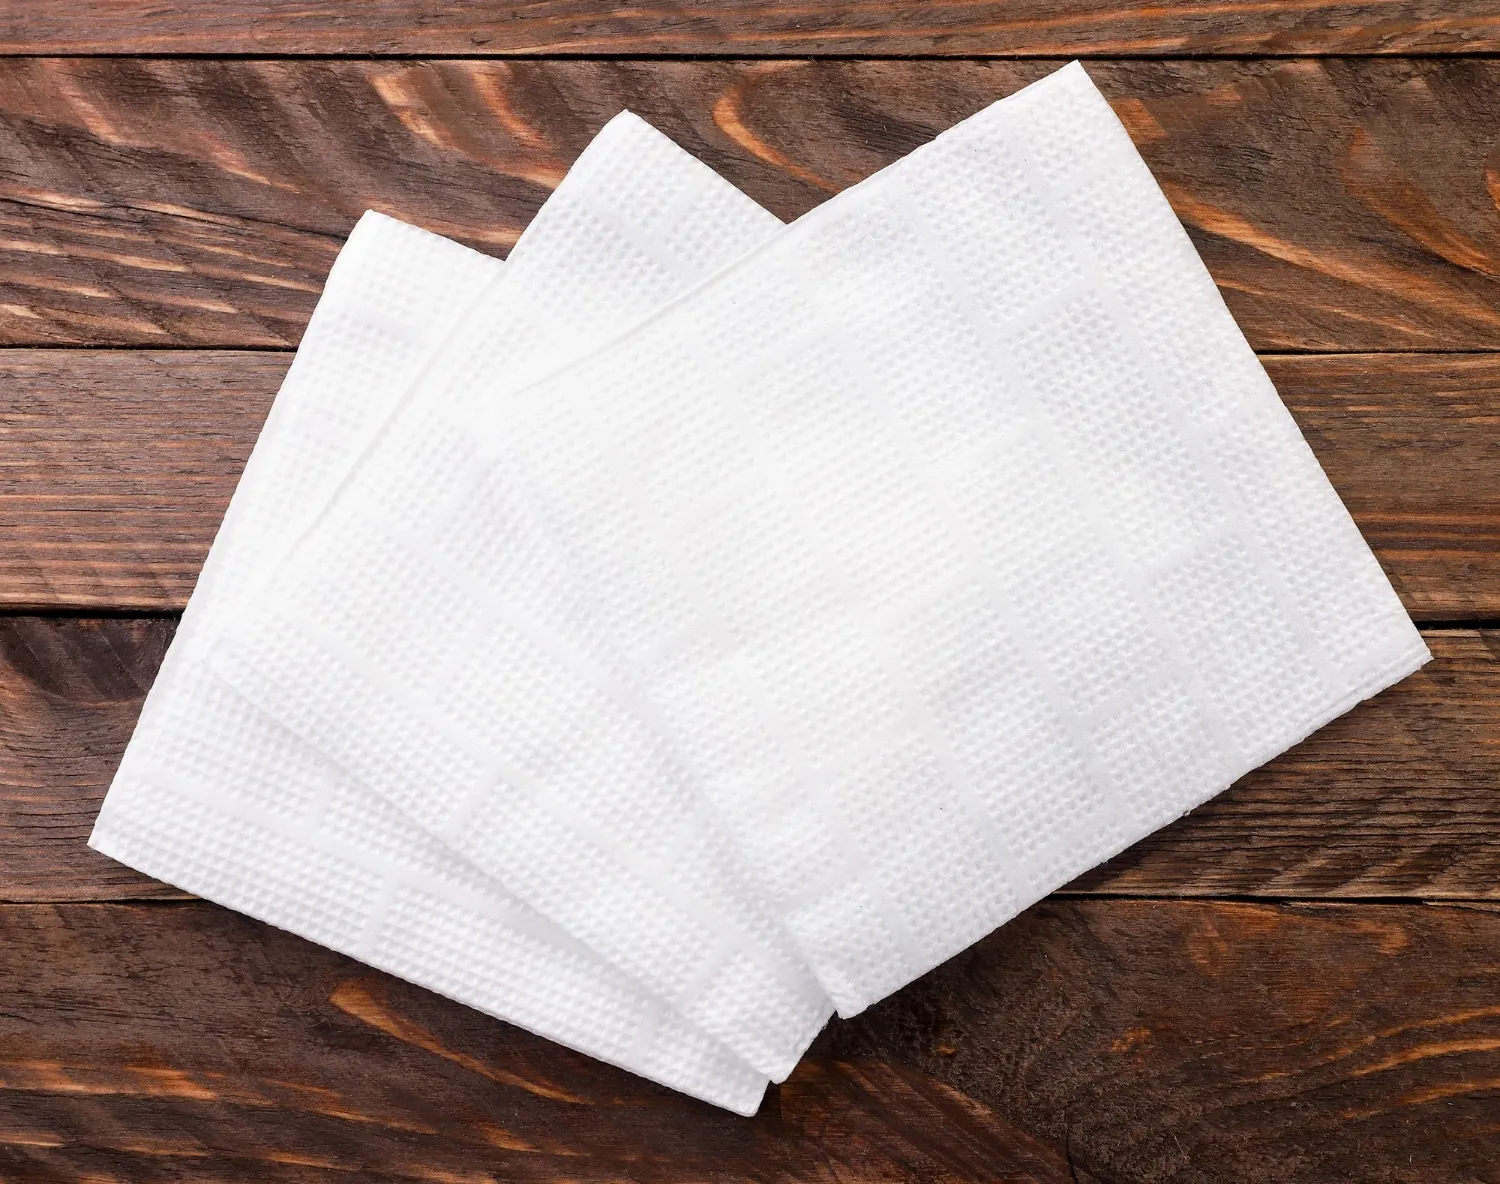 White paper napkins close up on wooden background. the view from top